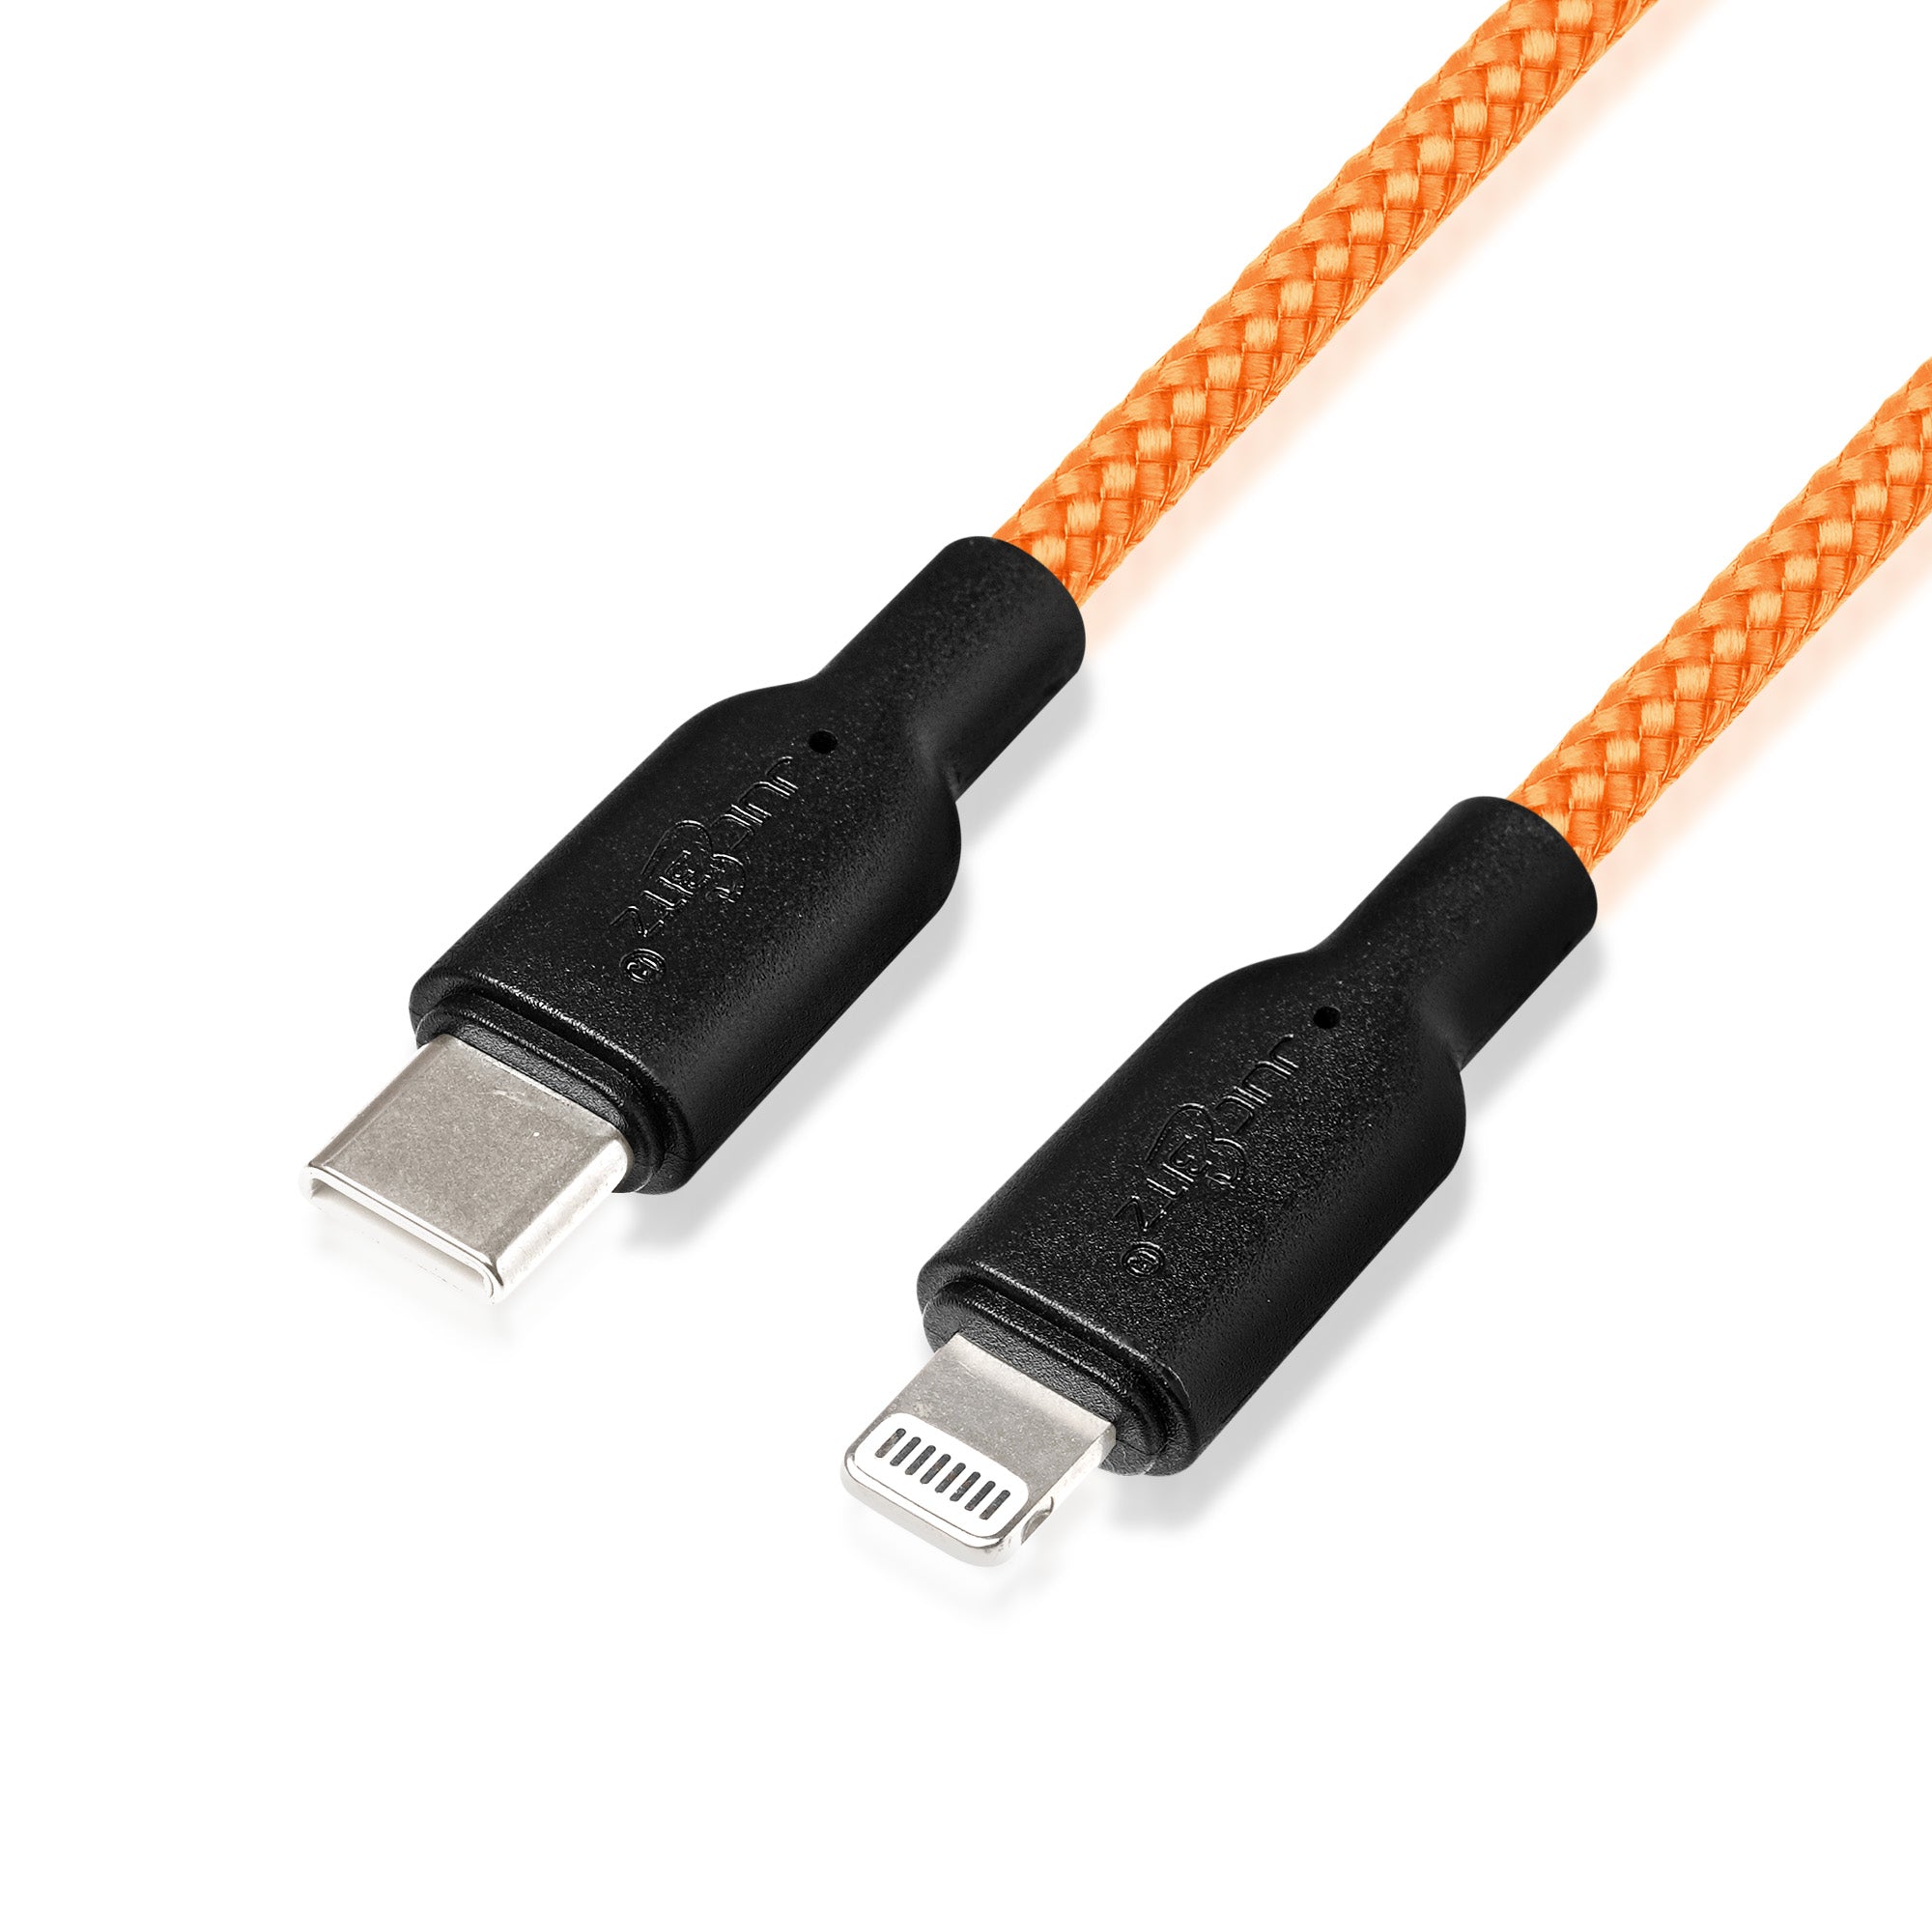 Braided Heavy Duty USB-C Fast Charger Data Sync Cable for iPhone, iPad, iPod - Orange